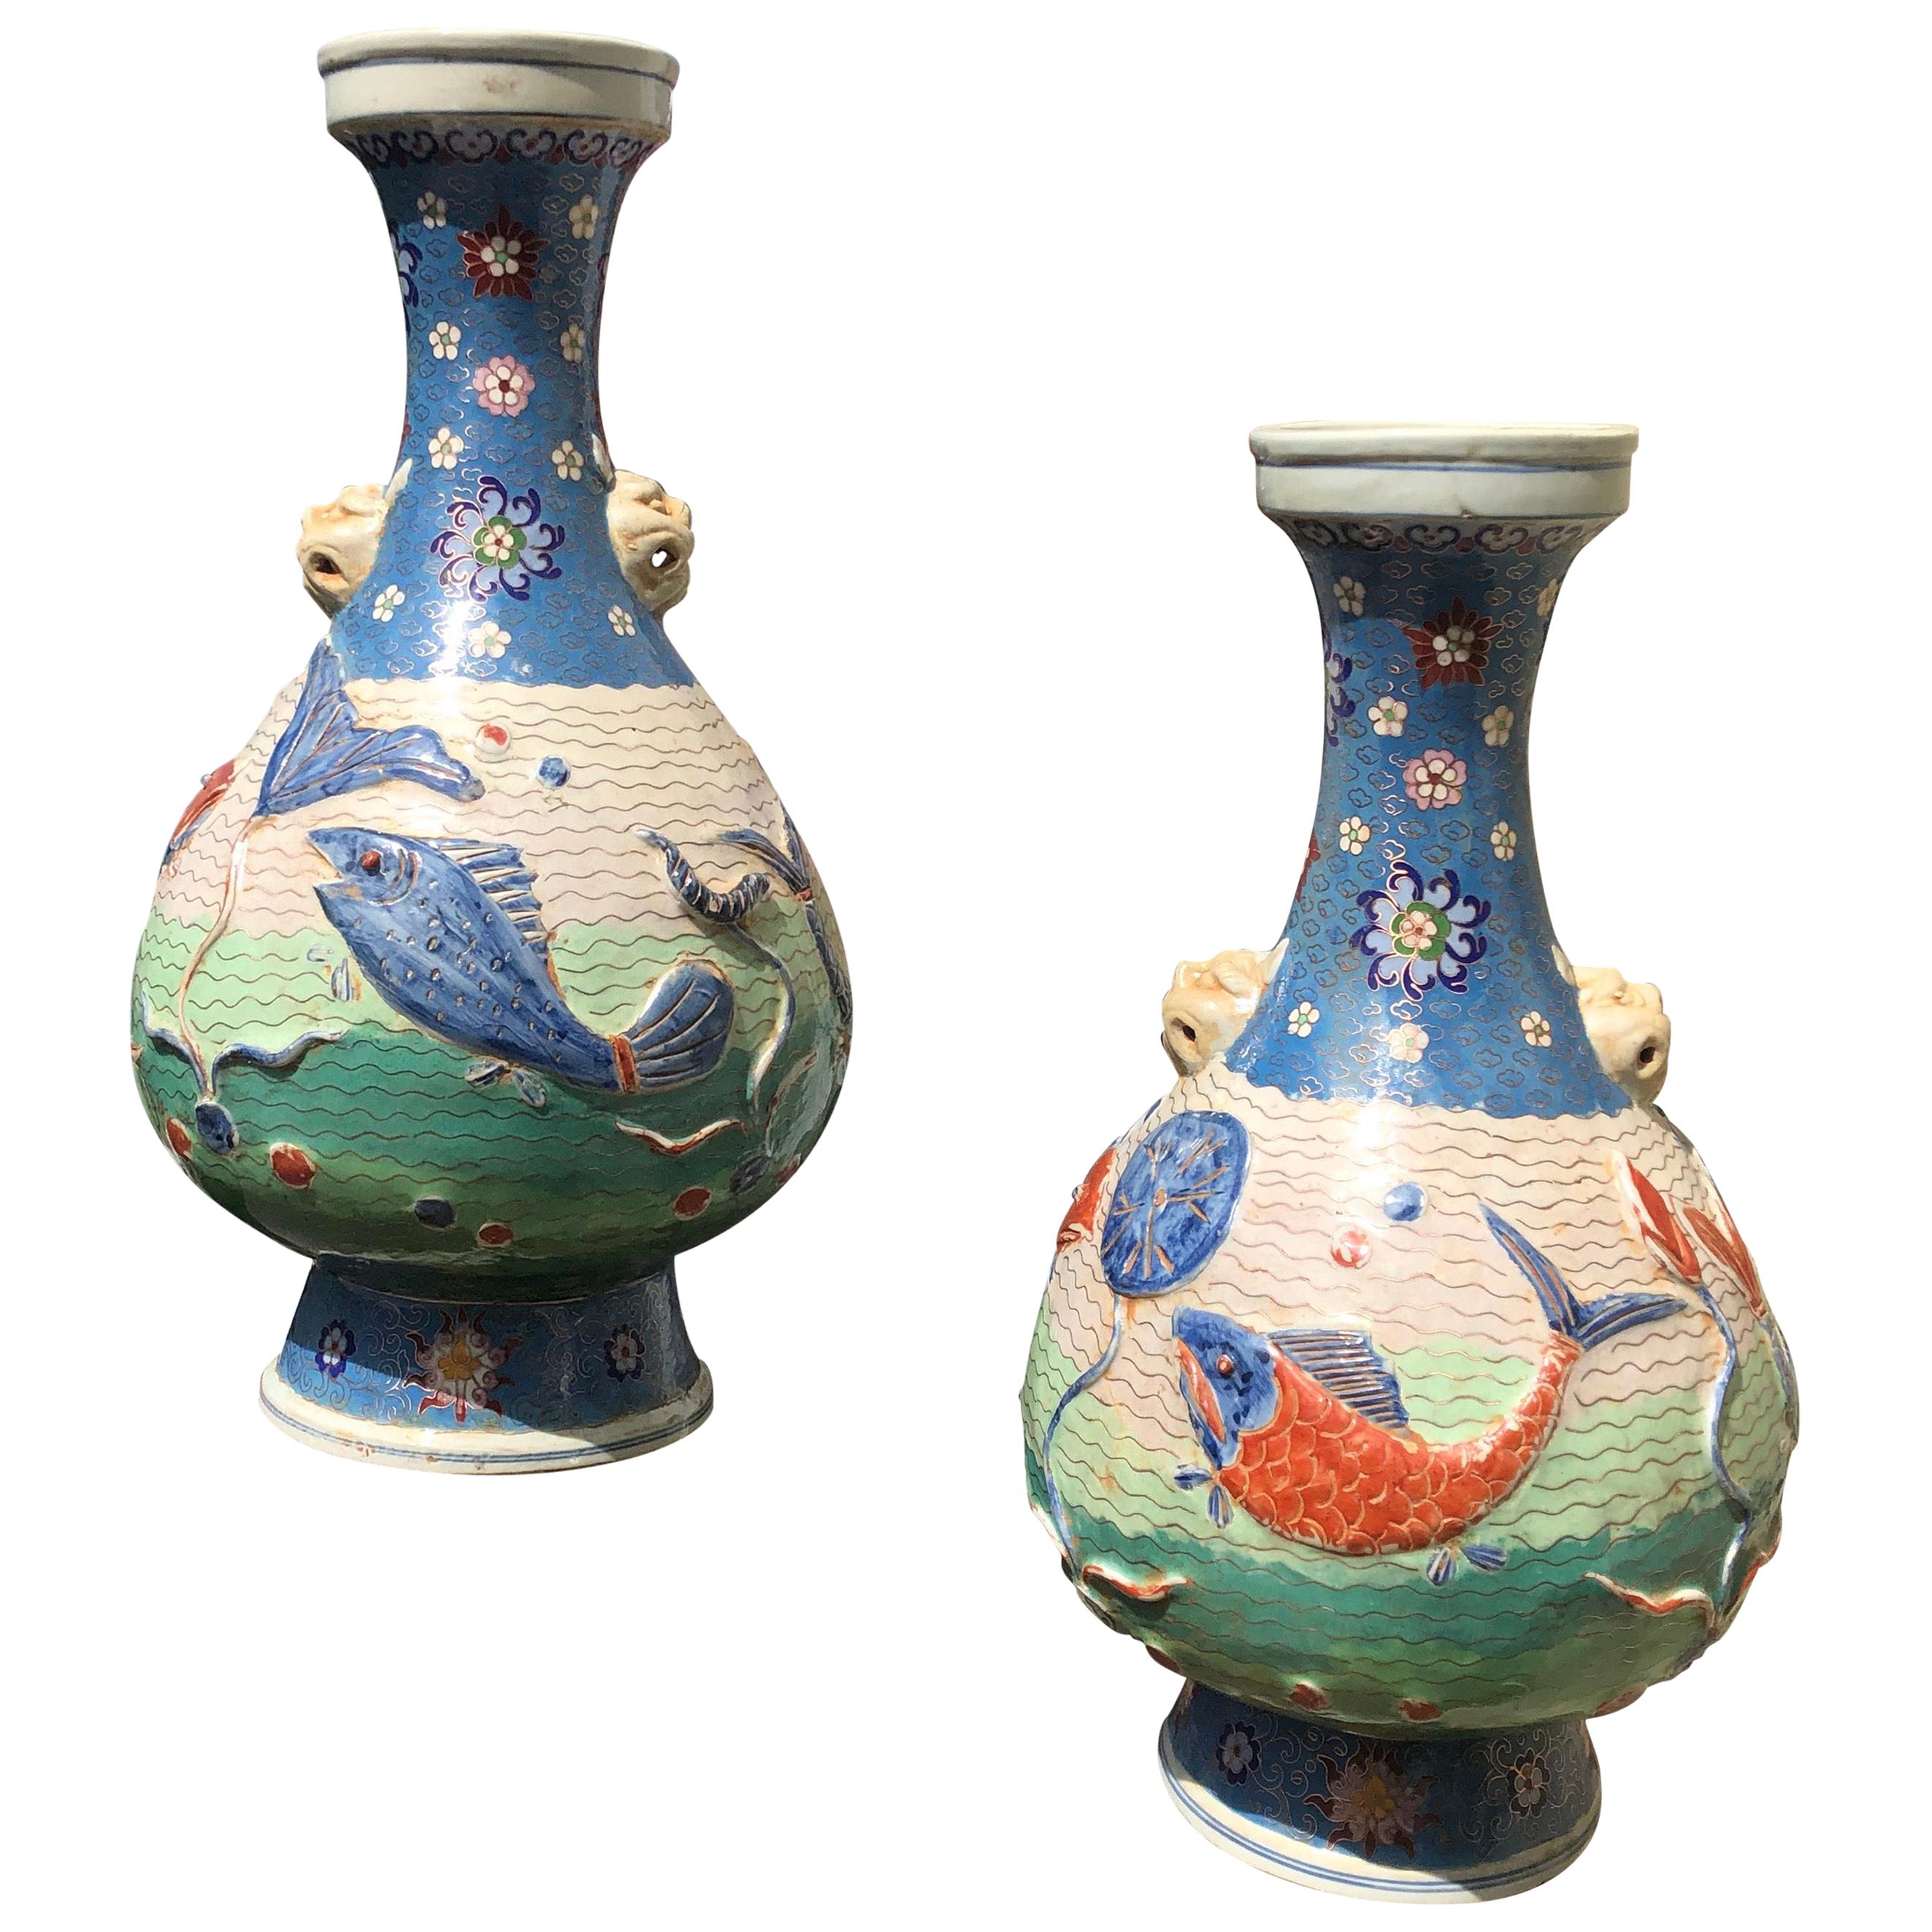 Pair of early 20th Century Chinese Cloisonne Vases with Fish